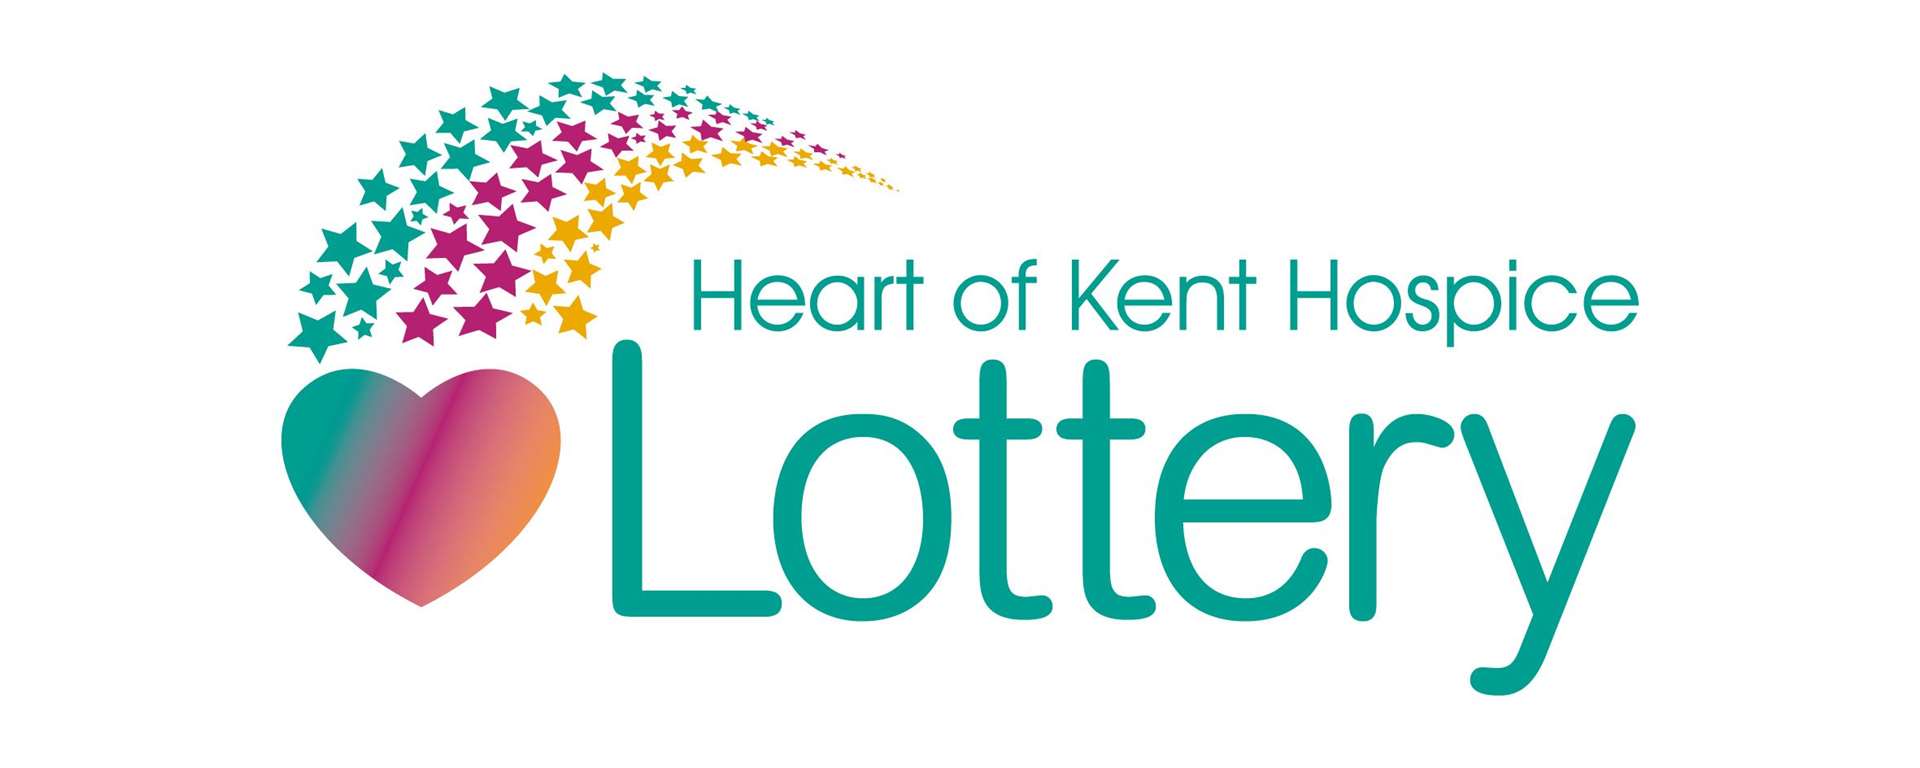 Heart of Kent Hospice are celebrating their 30th anniversary this year.